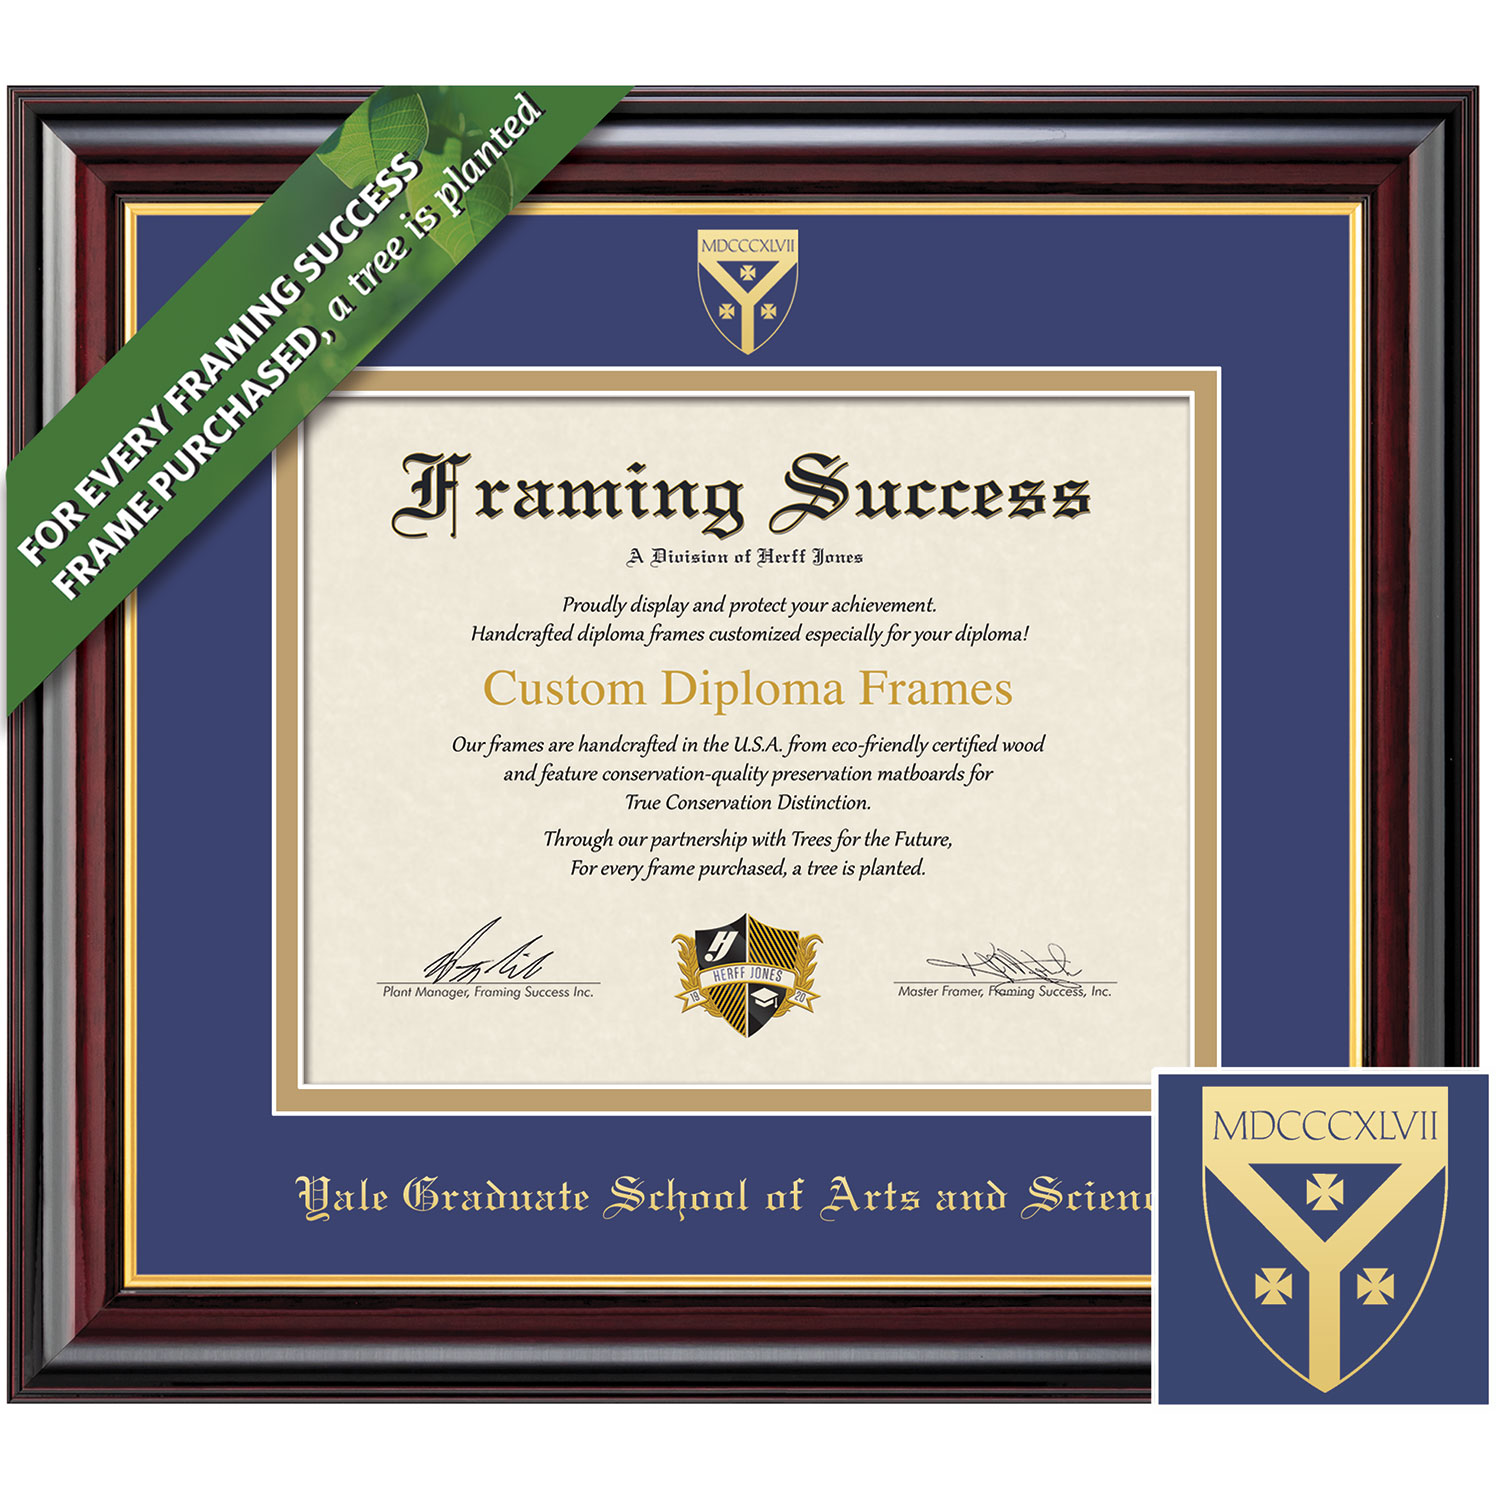 Framing Success 10 x 12 Windsor Gold Embossed School Seal School Of Arts and Sciences Diploma Frame